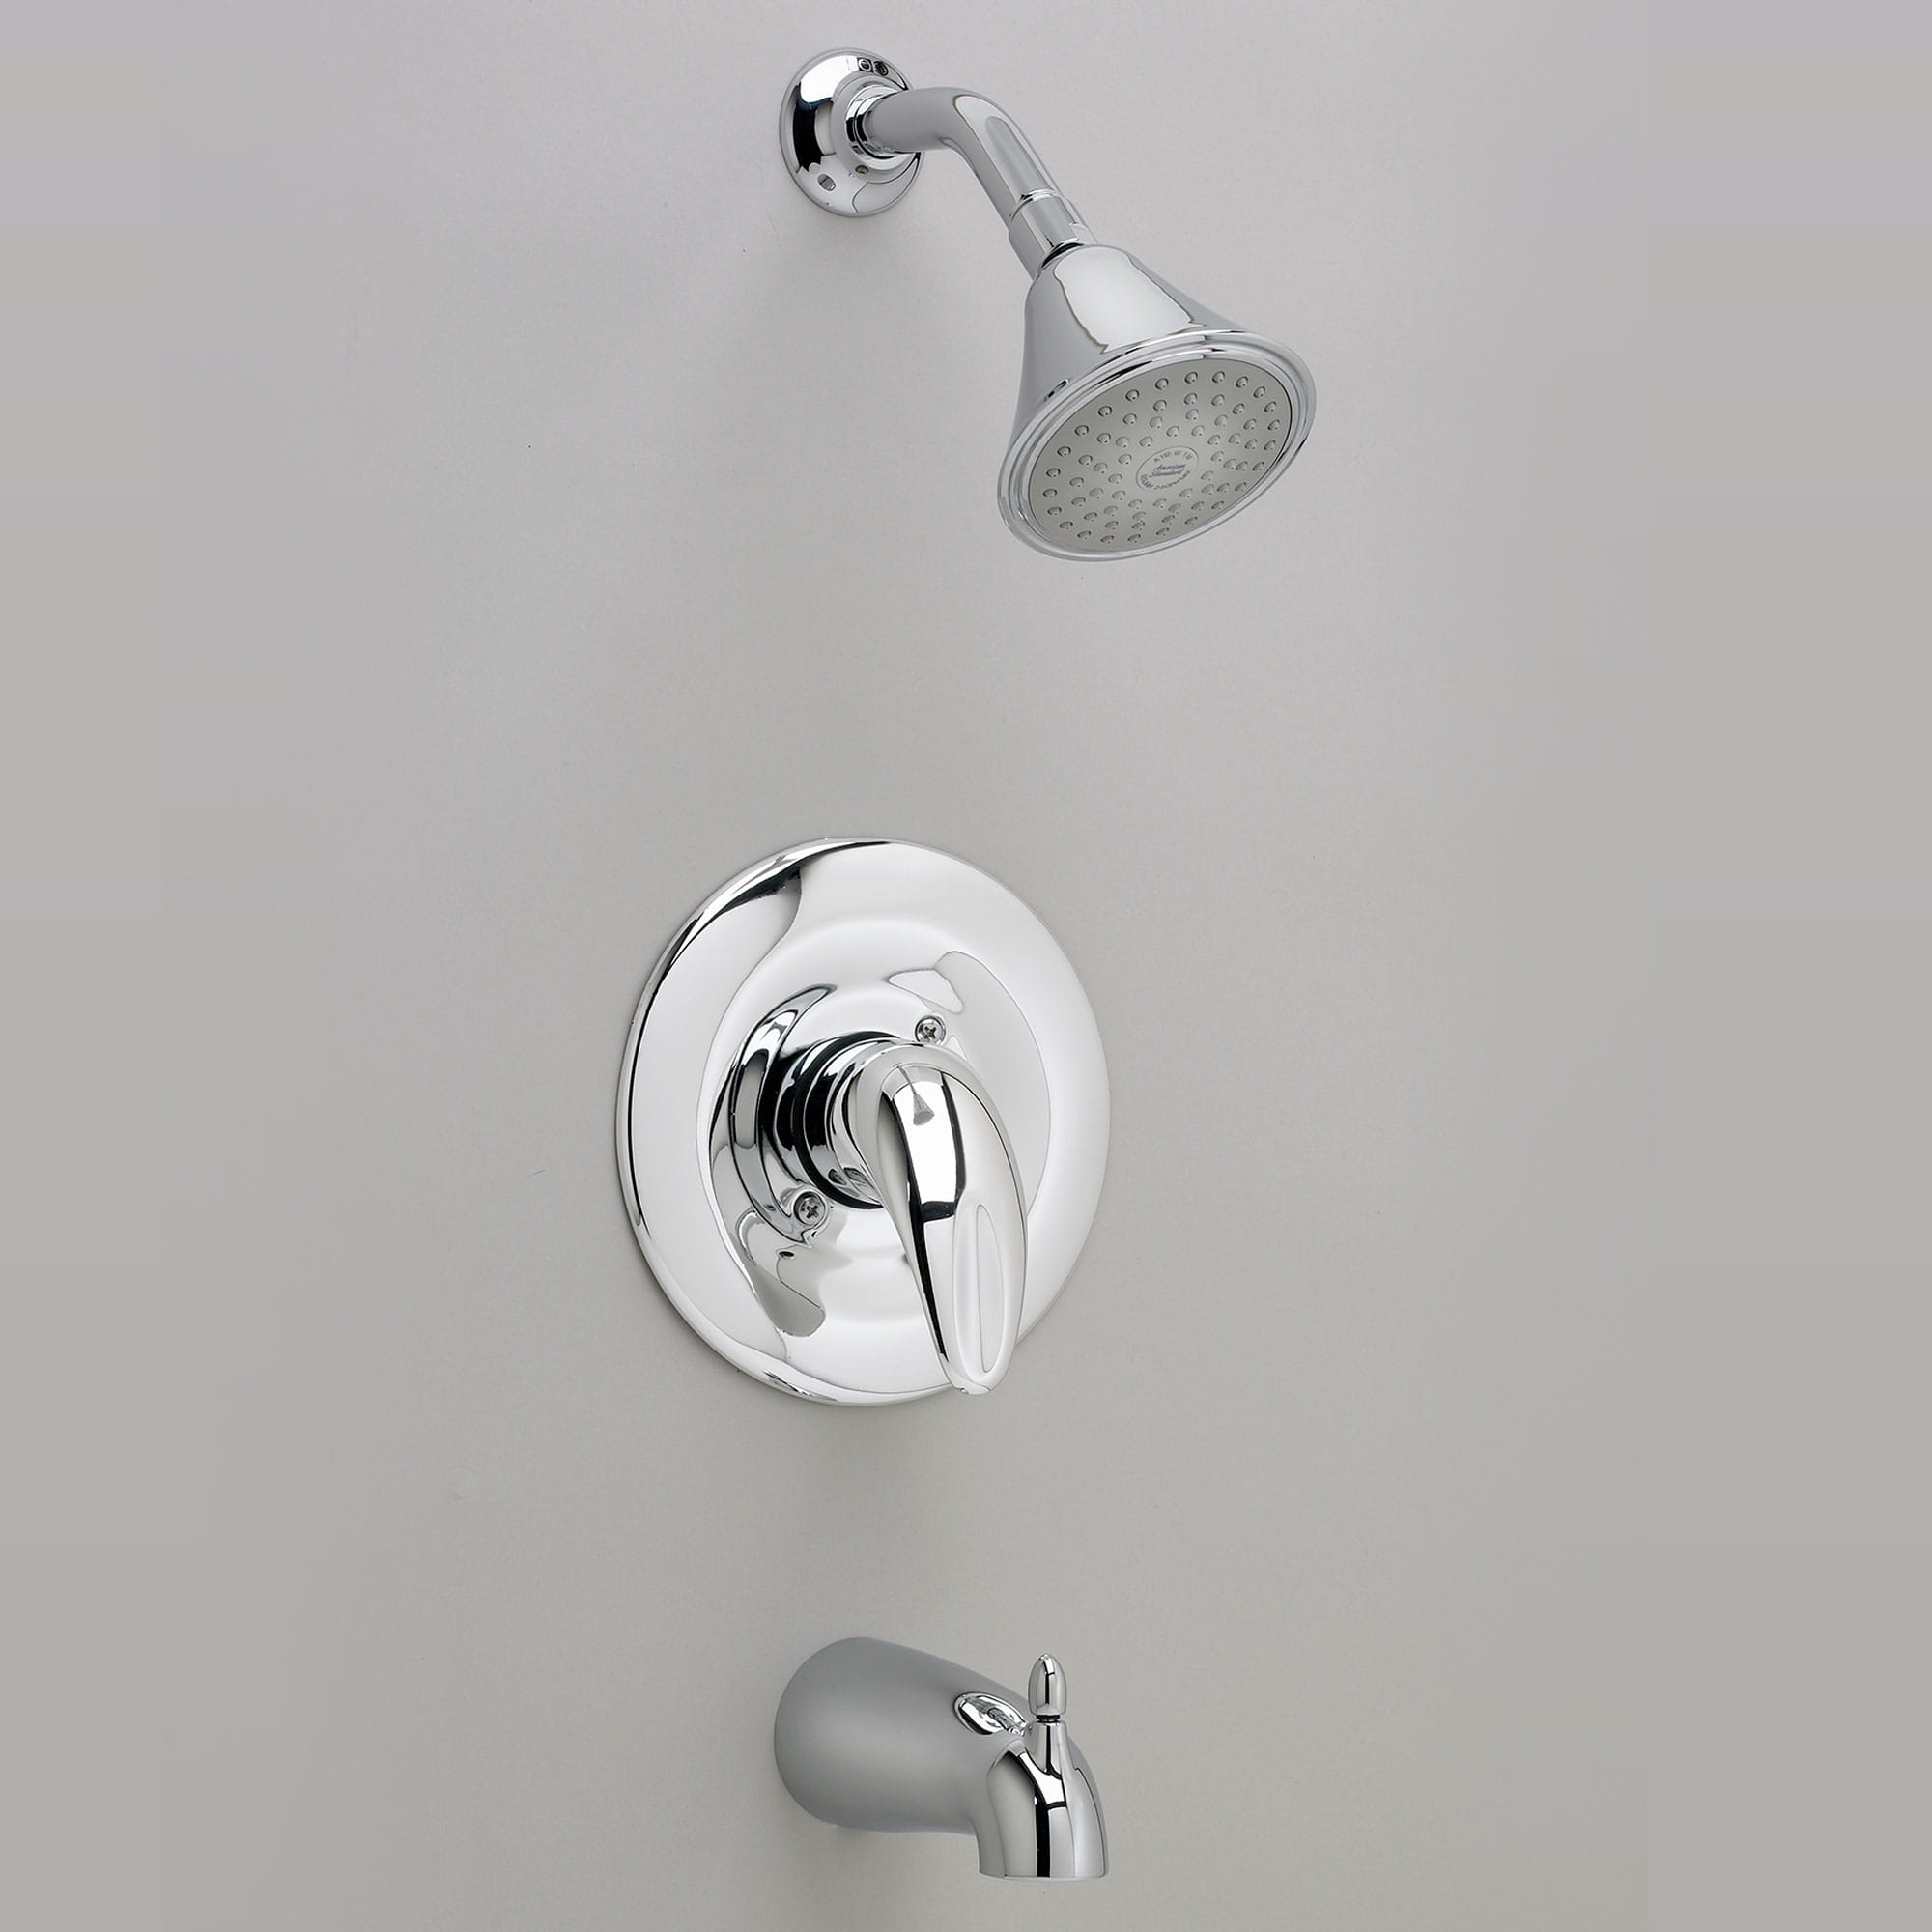 Reliant 3 2.5 GPM Tub and Shower Trim Kit with Lever Handle